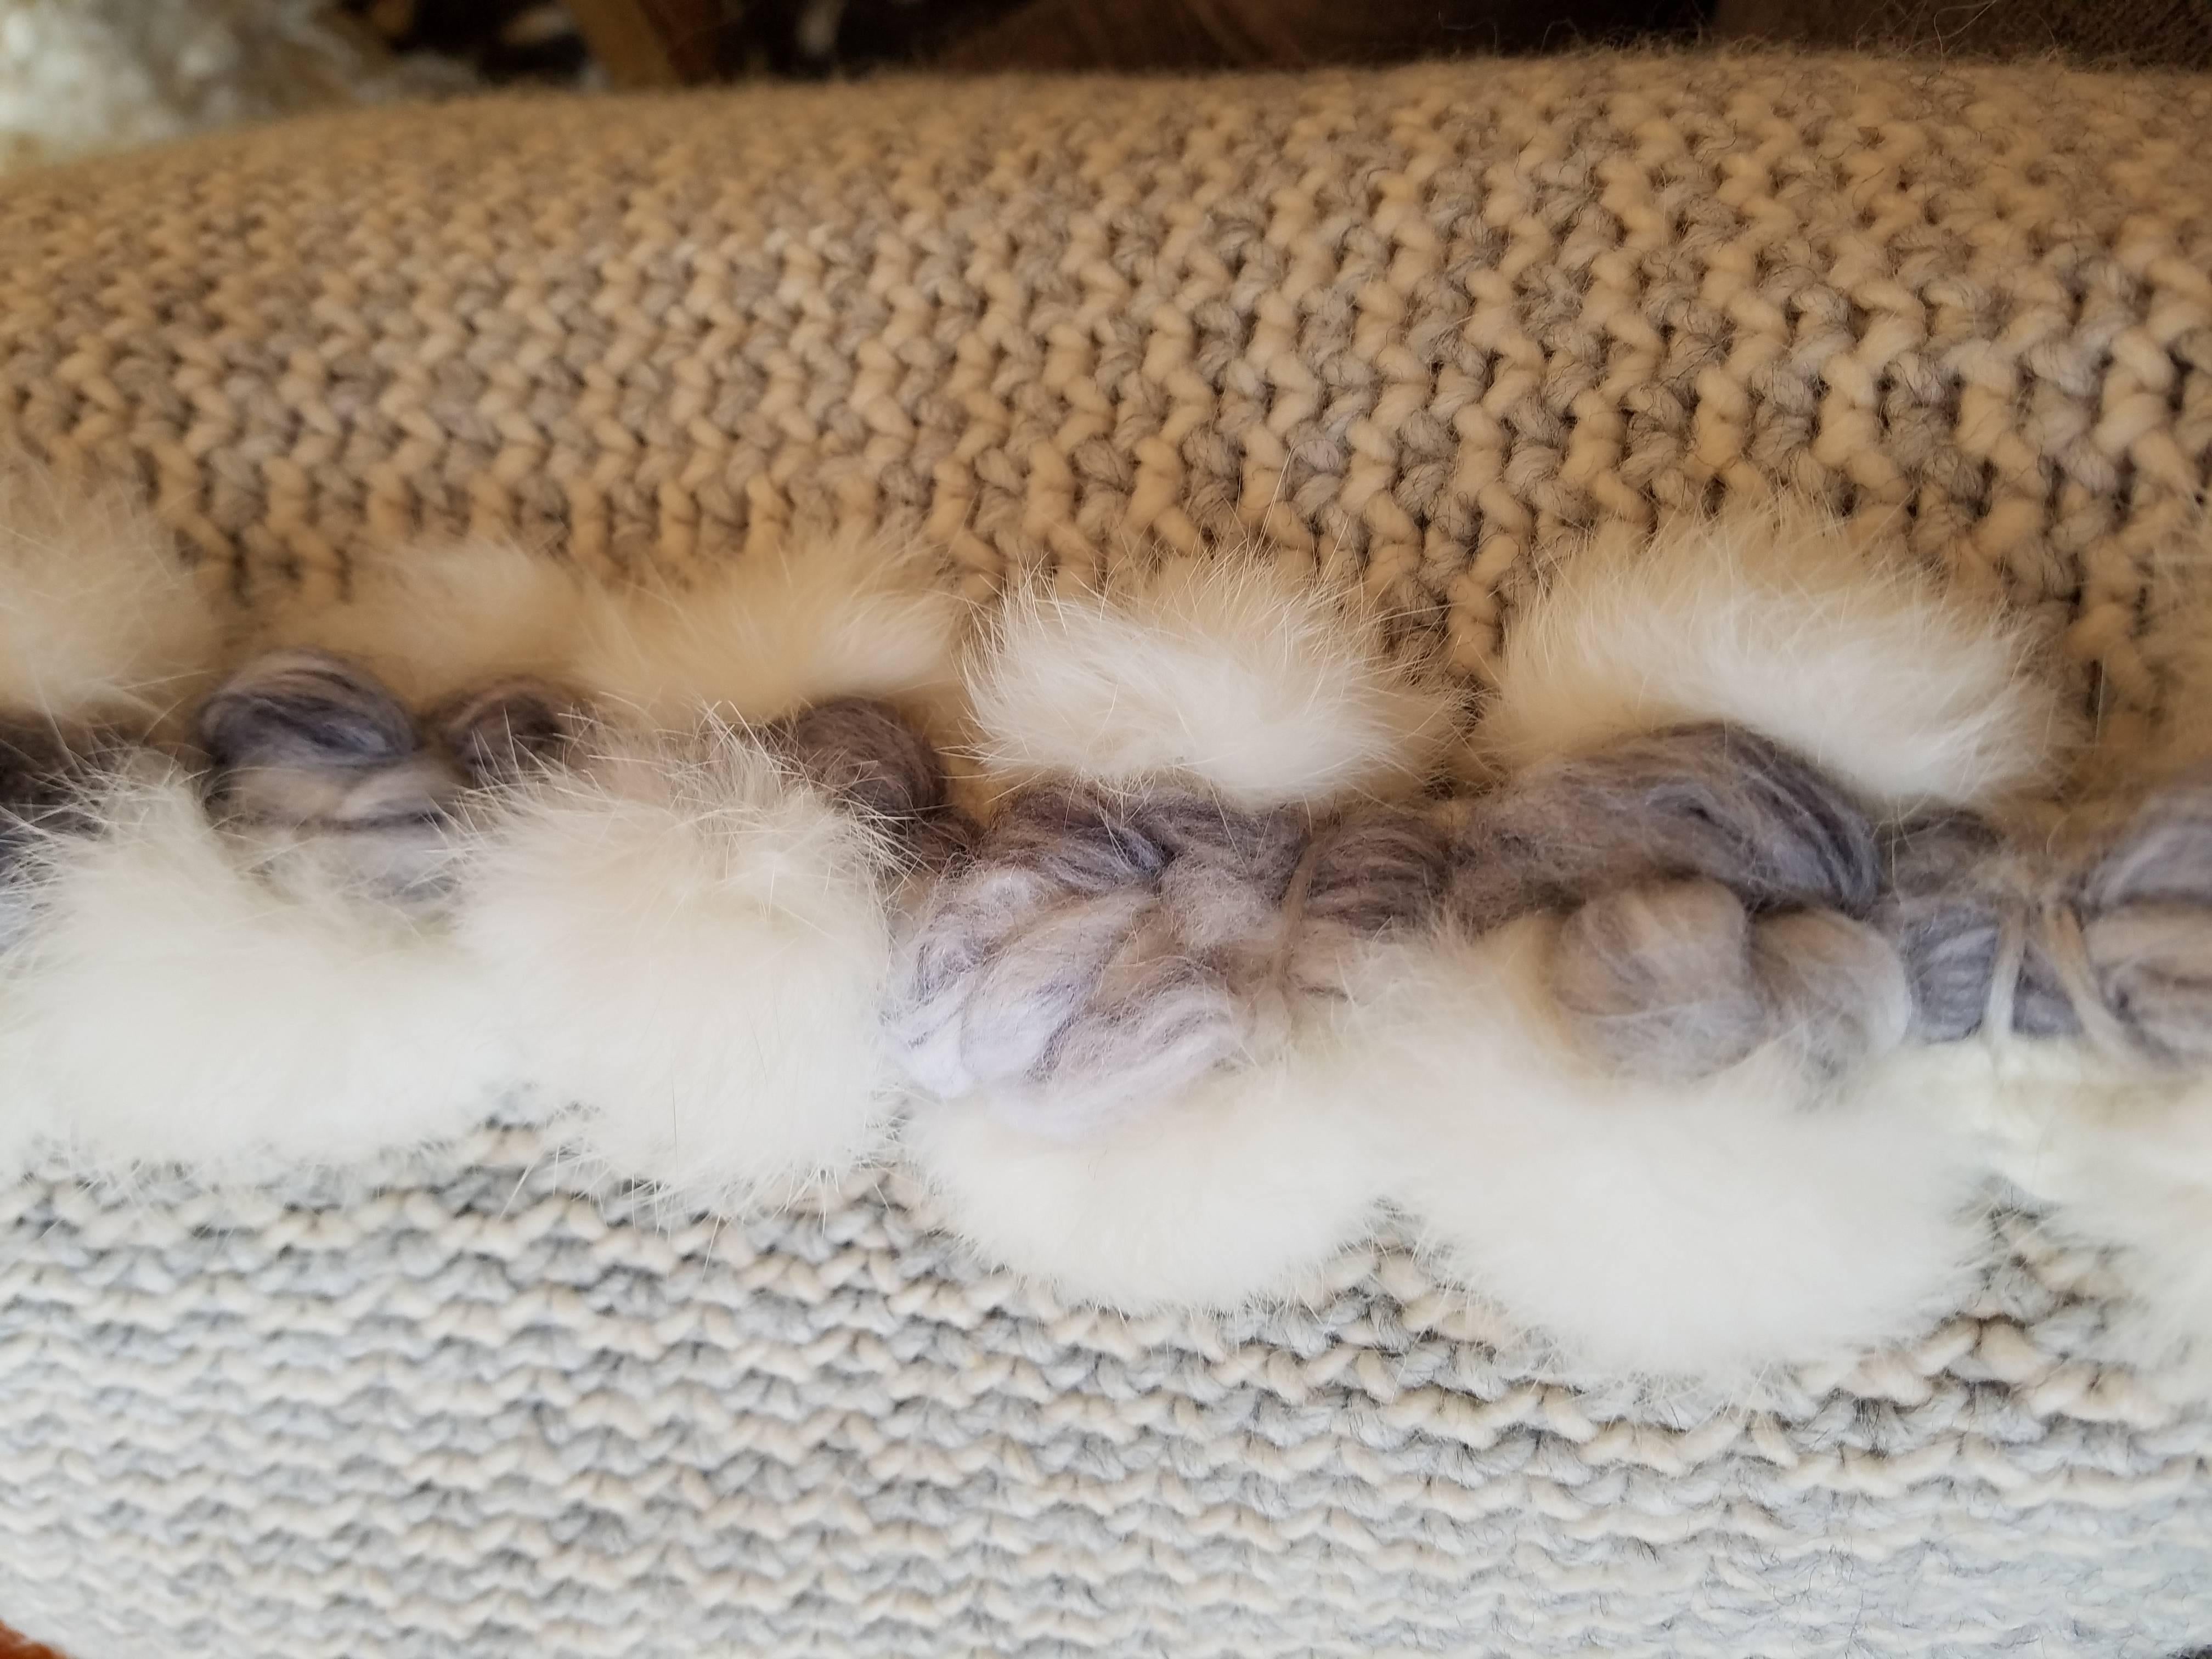 Handwoven Merino Wool Pillow with Angora Trim by Le Lampade
Wonderfully soft Merino wool handwoven and trimmed with hand tufted angora.
Feather and down inserts with hidden zippers. 
Made in Italy.